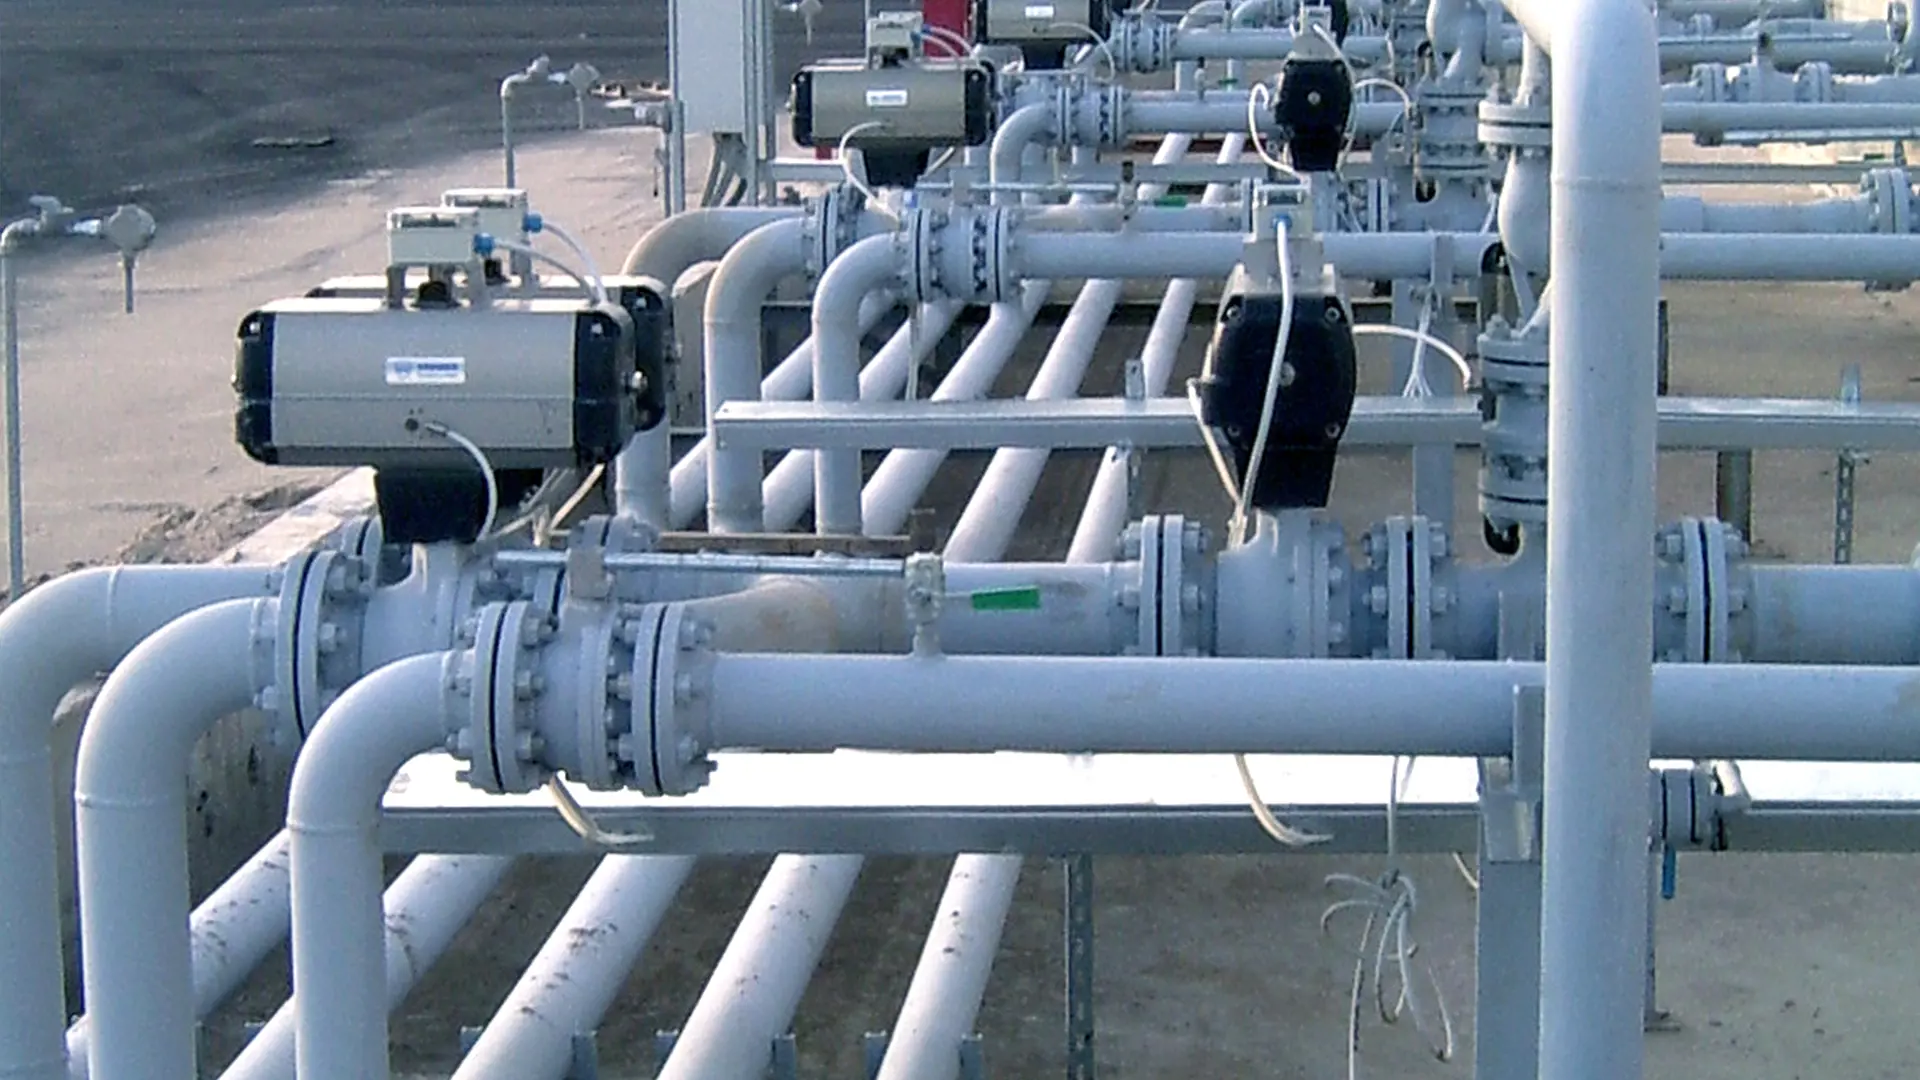 image of an LPG piping systems with white pipelines